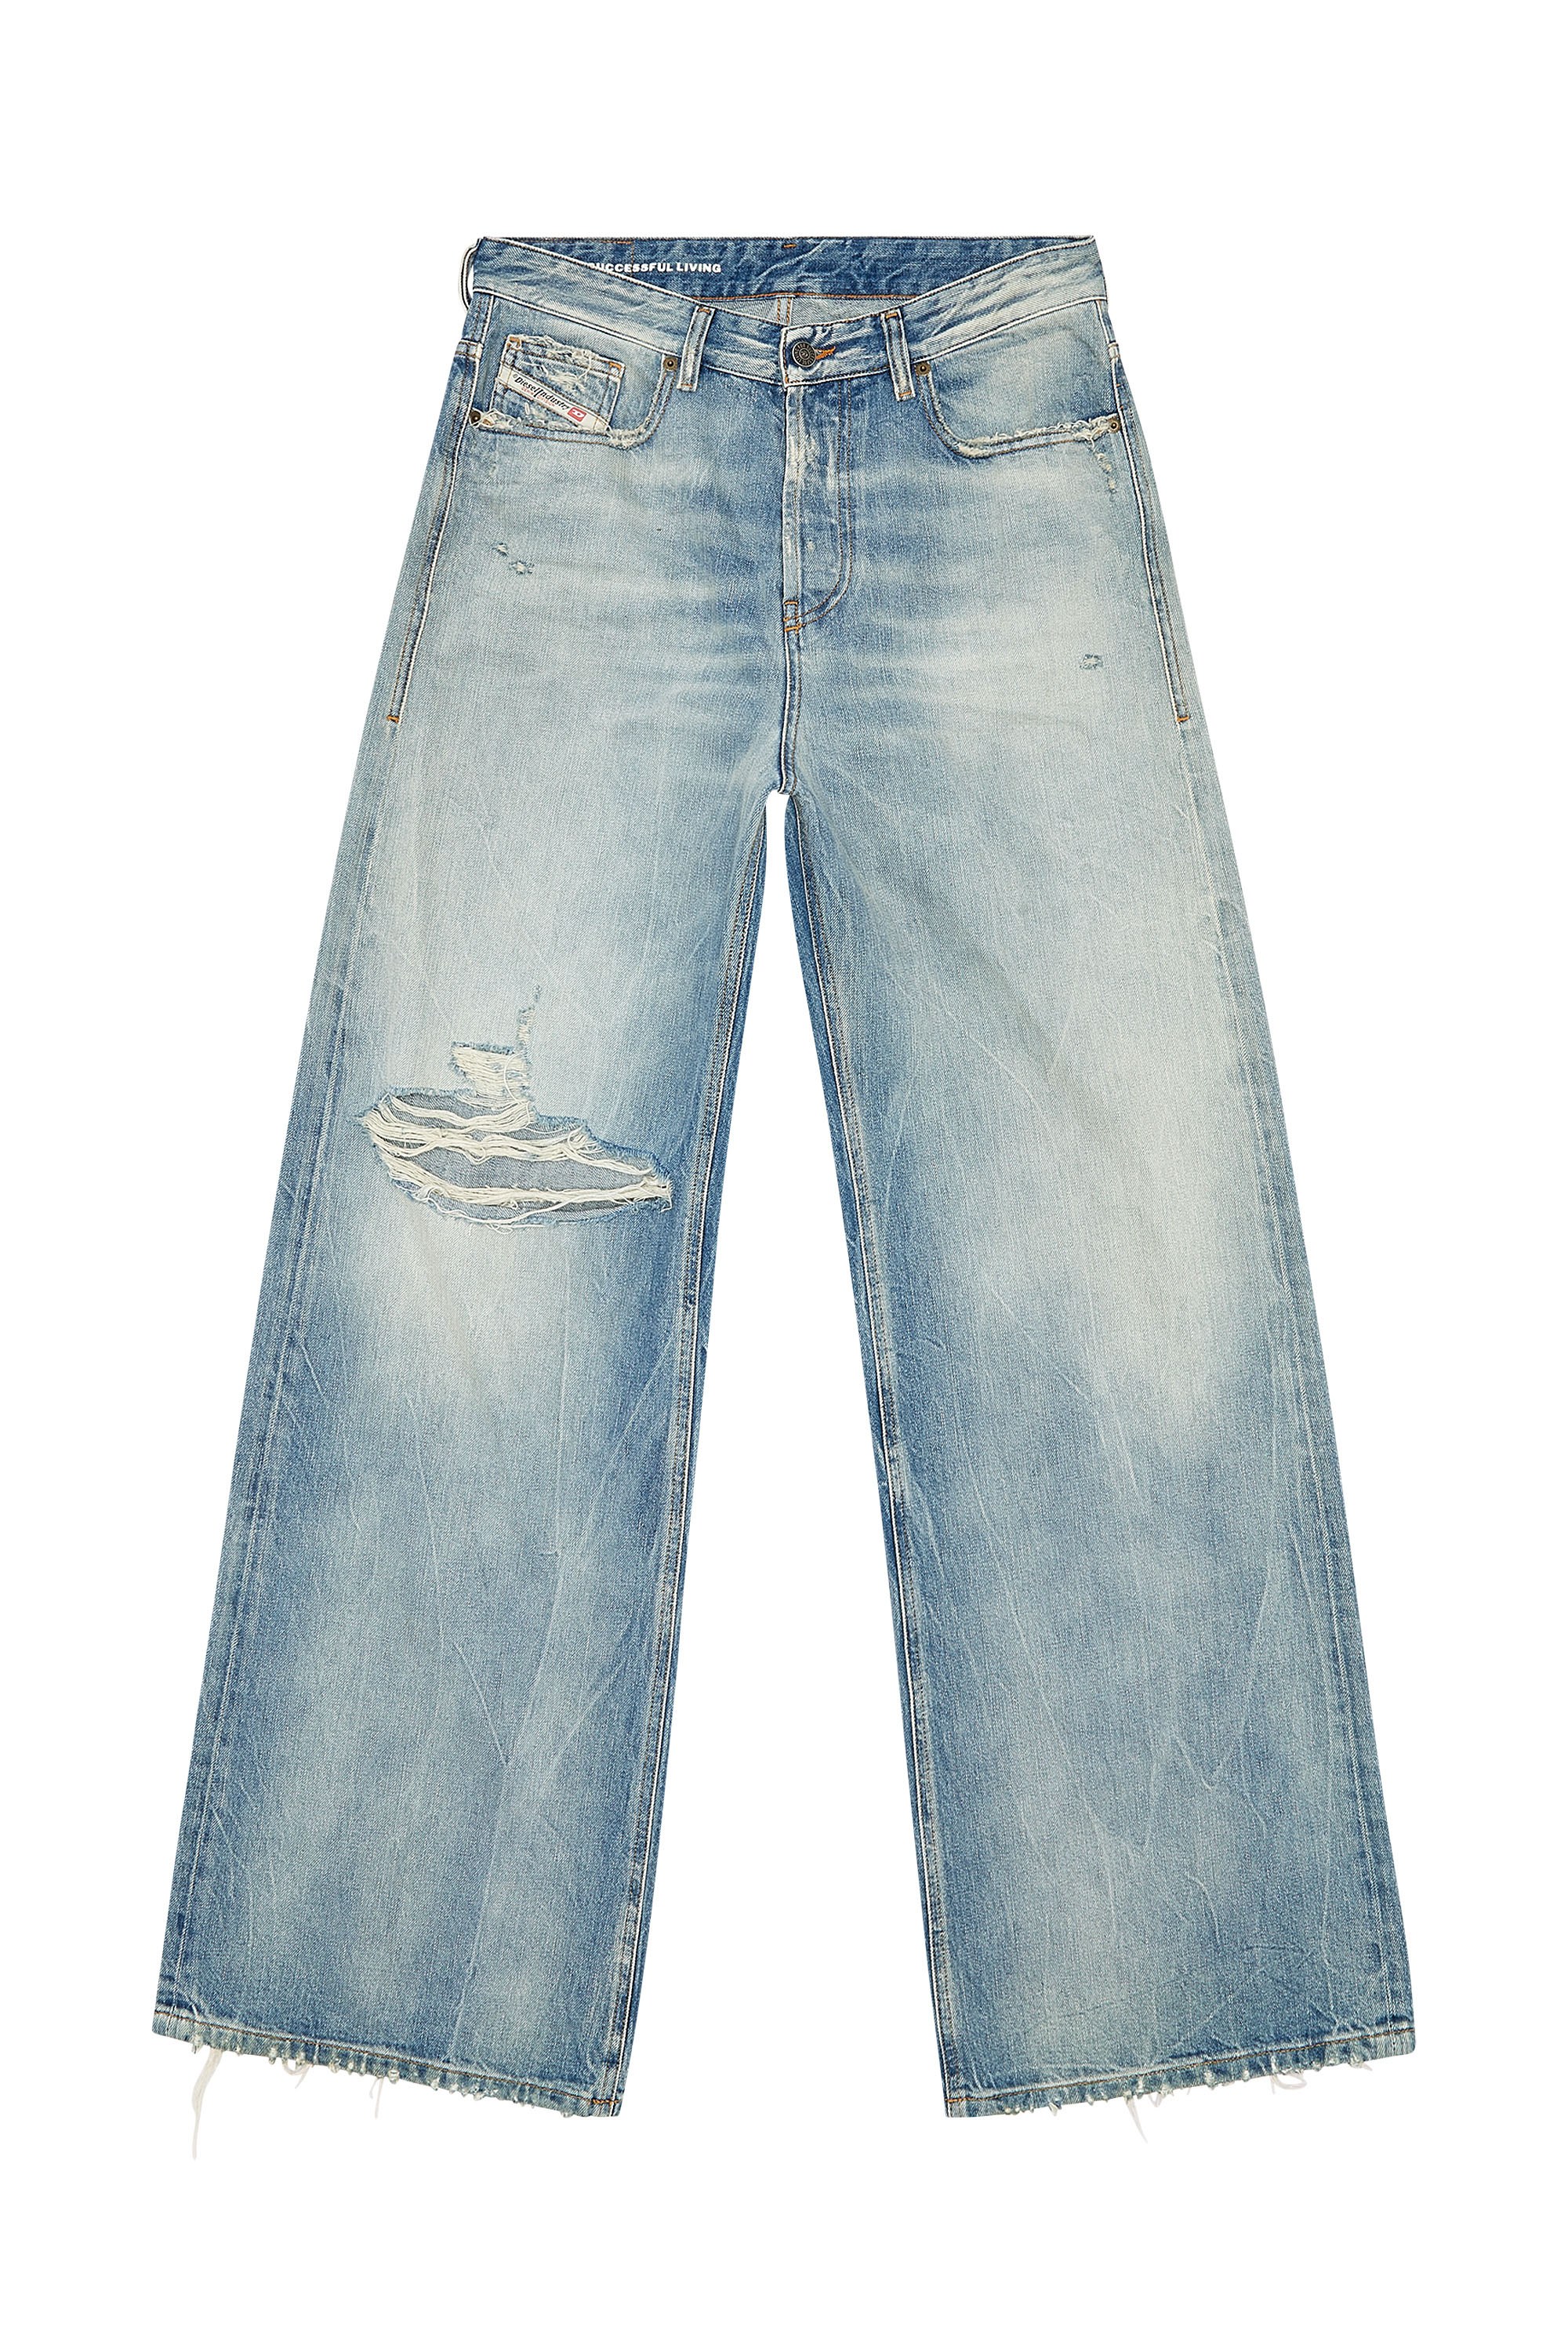 Diesel - Straight Jeans 1996 D-Sire 09H58, Mujer Straight Jeans - 1996 D-Sire in Azul marino - Image 7